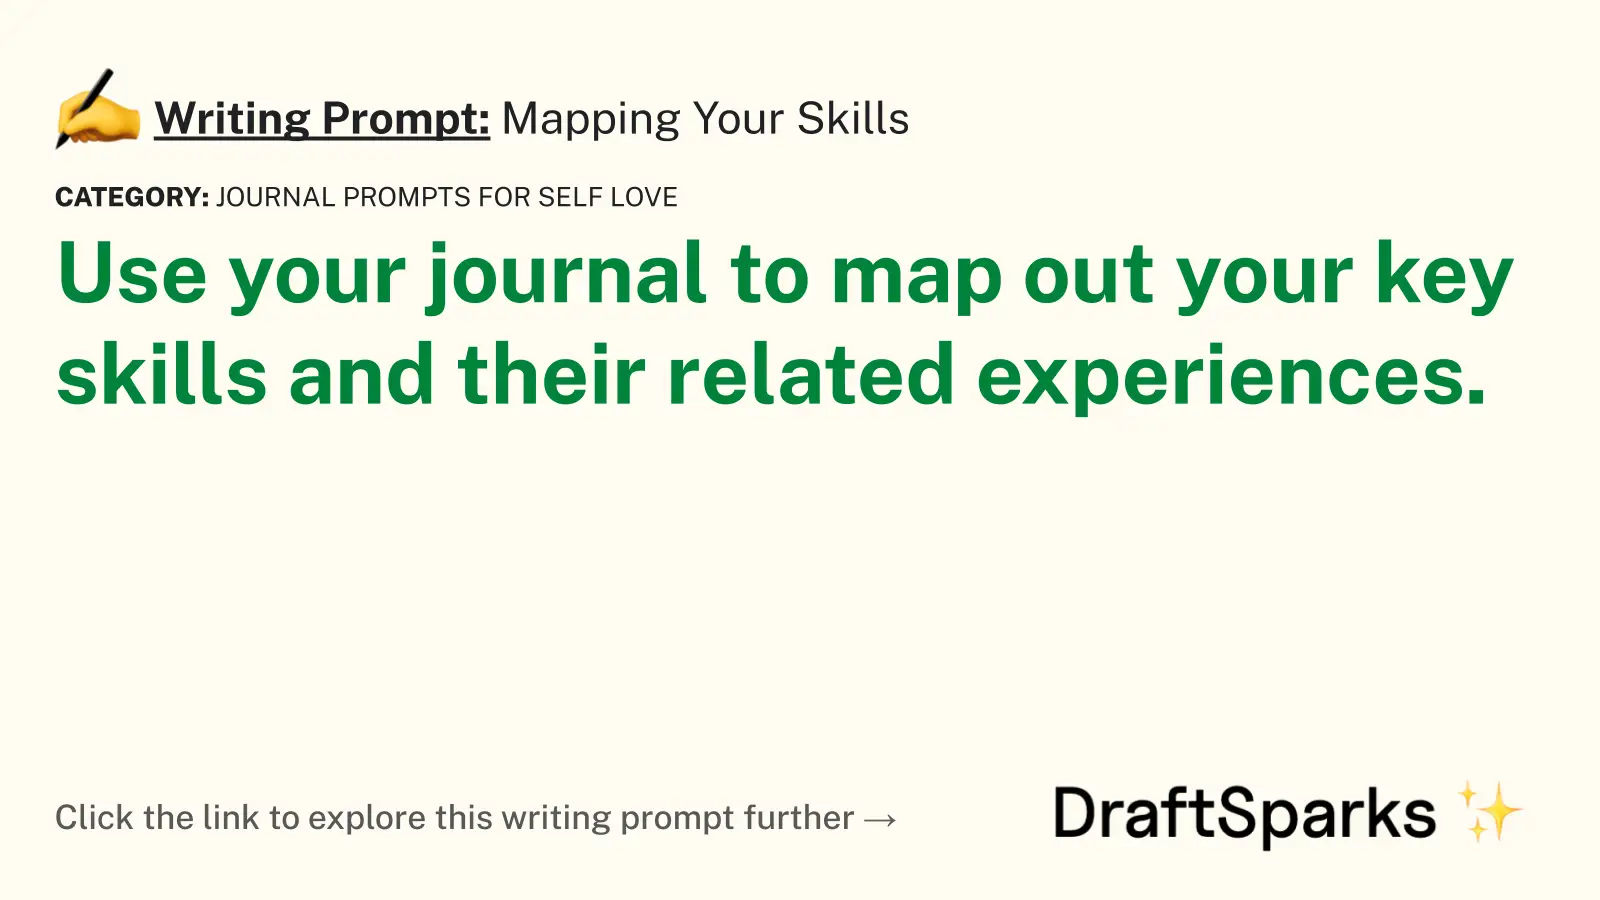 Mapping Your Skills